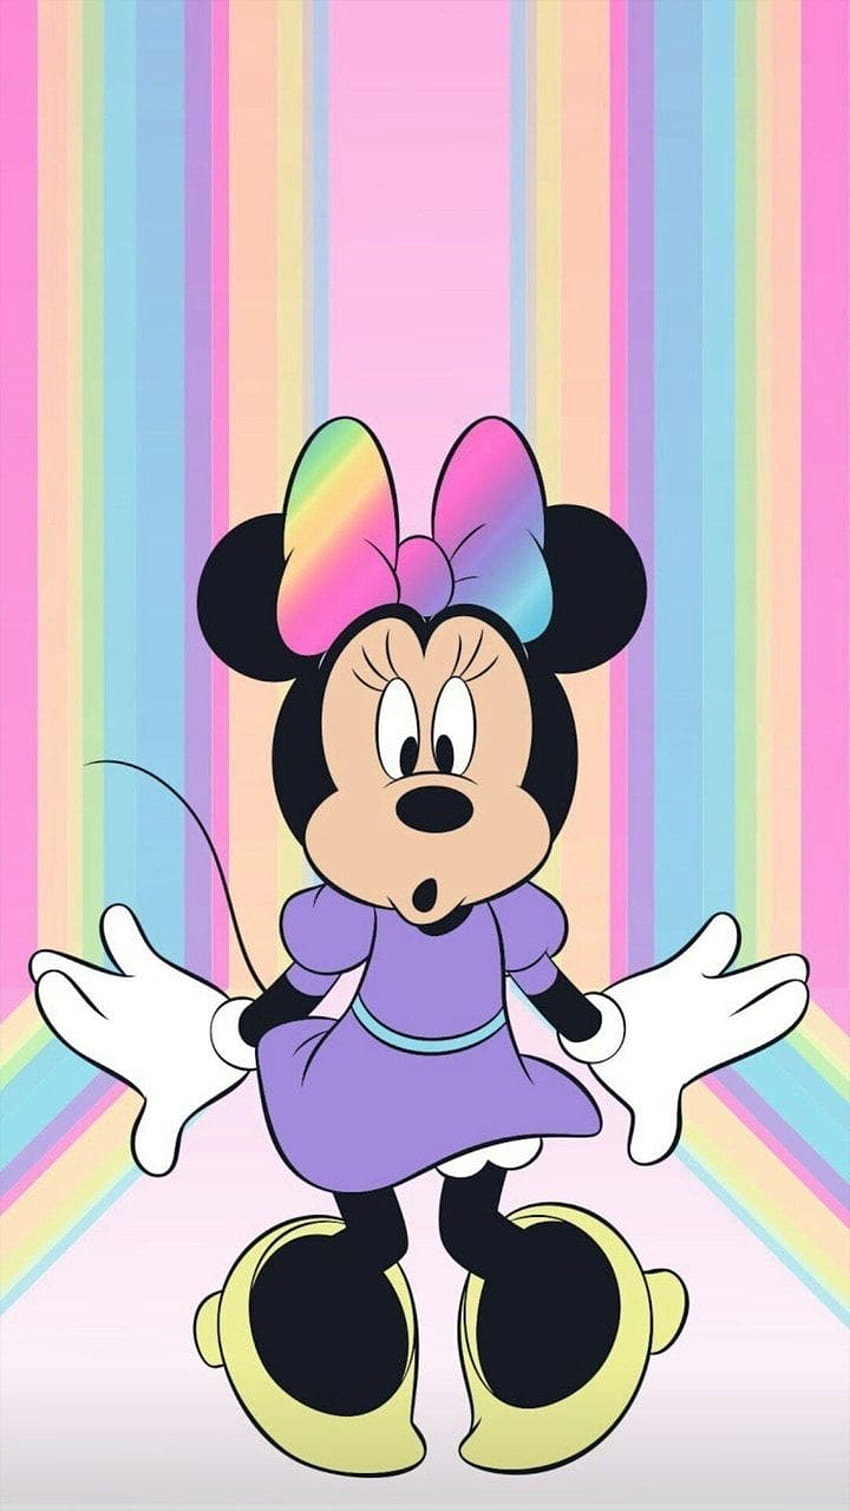 Minnie Mouse Dan Mickey Mouse, Minnie Mouse Ungu wallpaper ponsel HD